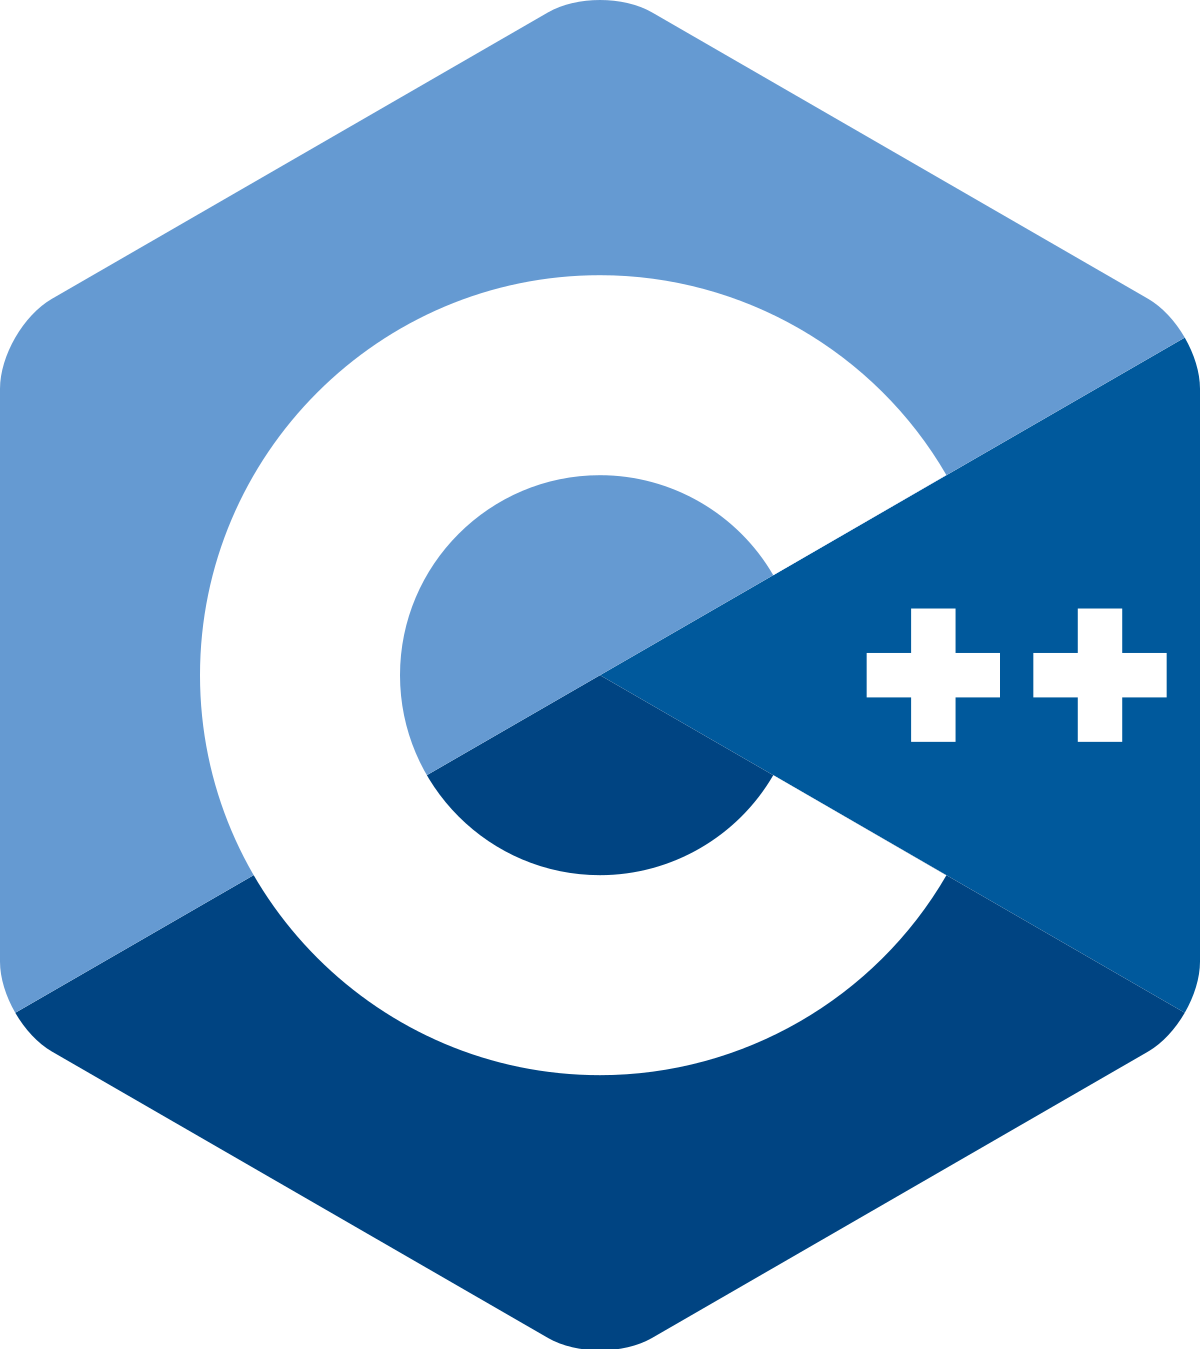 Why I am Moving Away from C++?